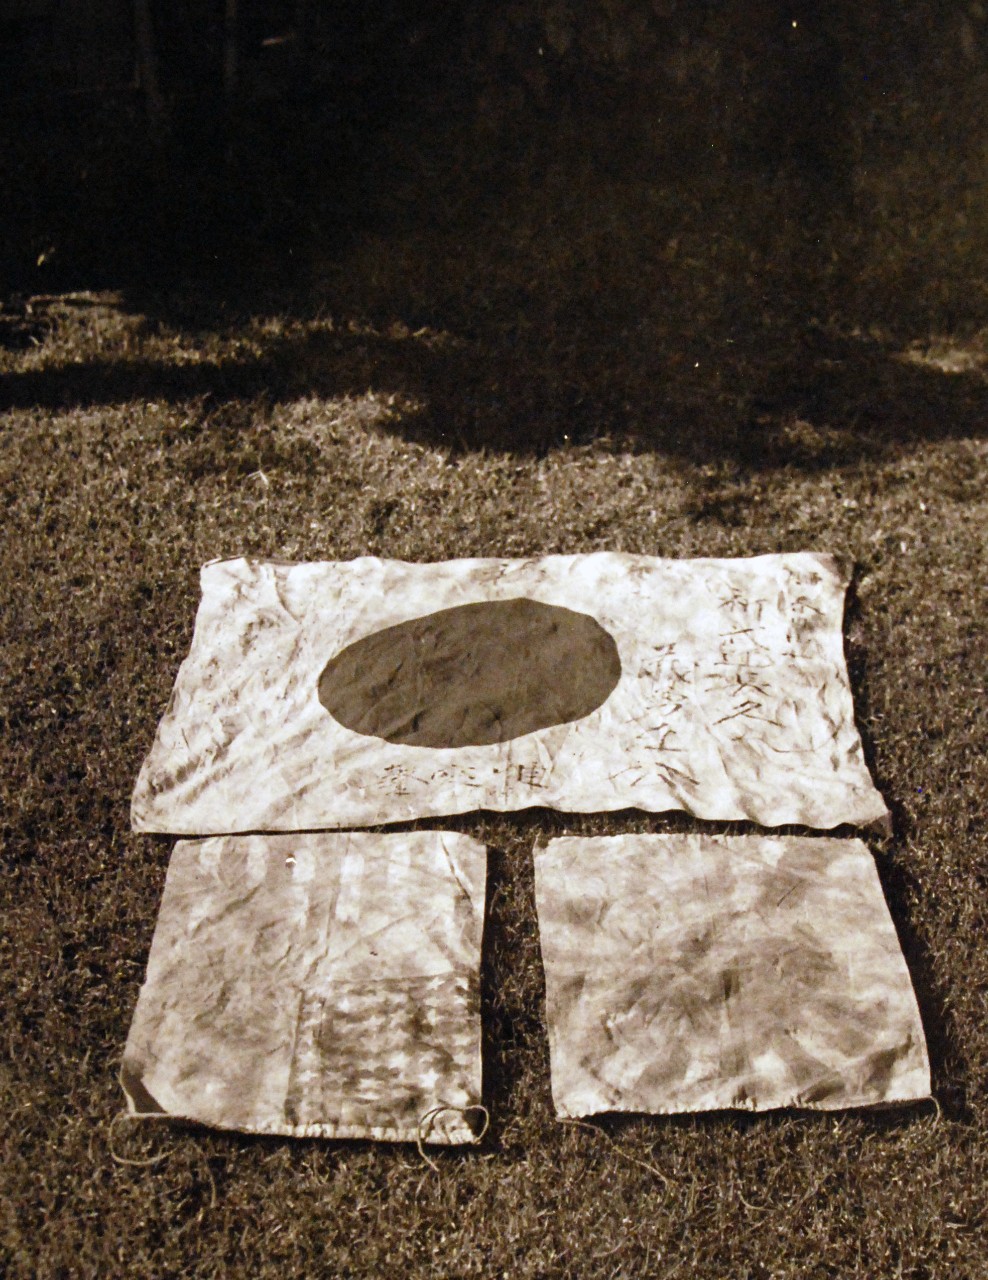 80-CF-1063-5:   Captured flags from Japanese submarine in the Hawaiian raid.  These were taken to Naval Air Station, San Diego, California, where they were photographed on 13 December 1941.  Official U.S. Navy Photograph, now in the collections of the National Archives.    Official U.S. Navy Photograph, now in the collections of the National Archives.           (9/16/2014).